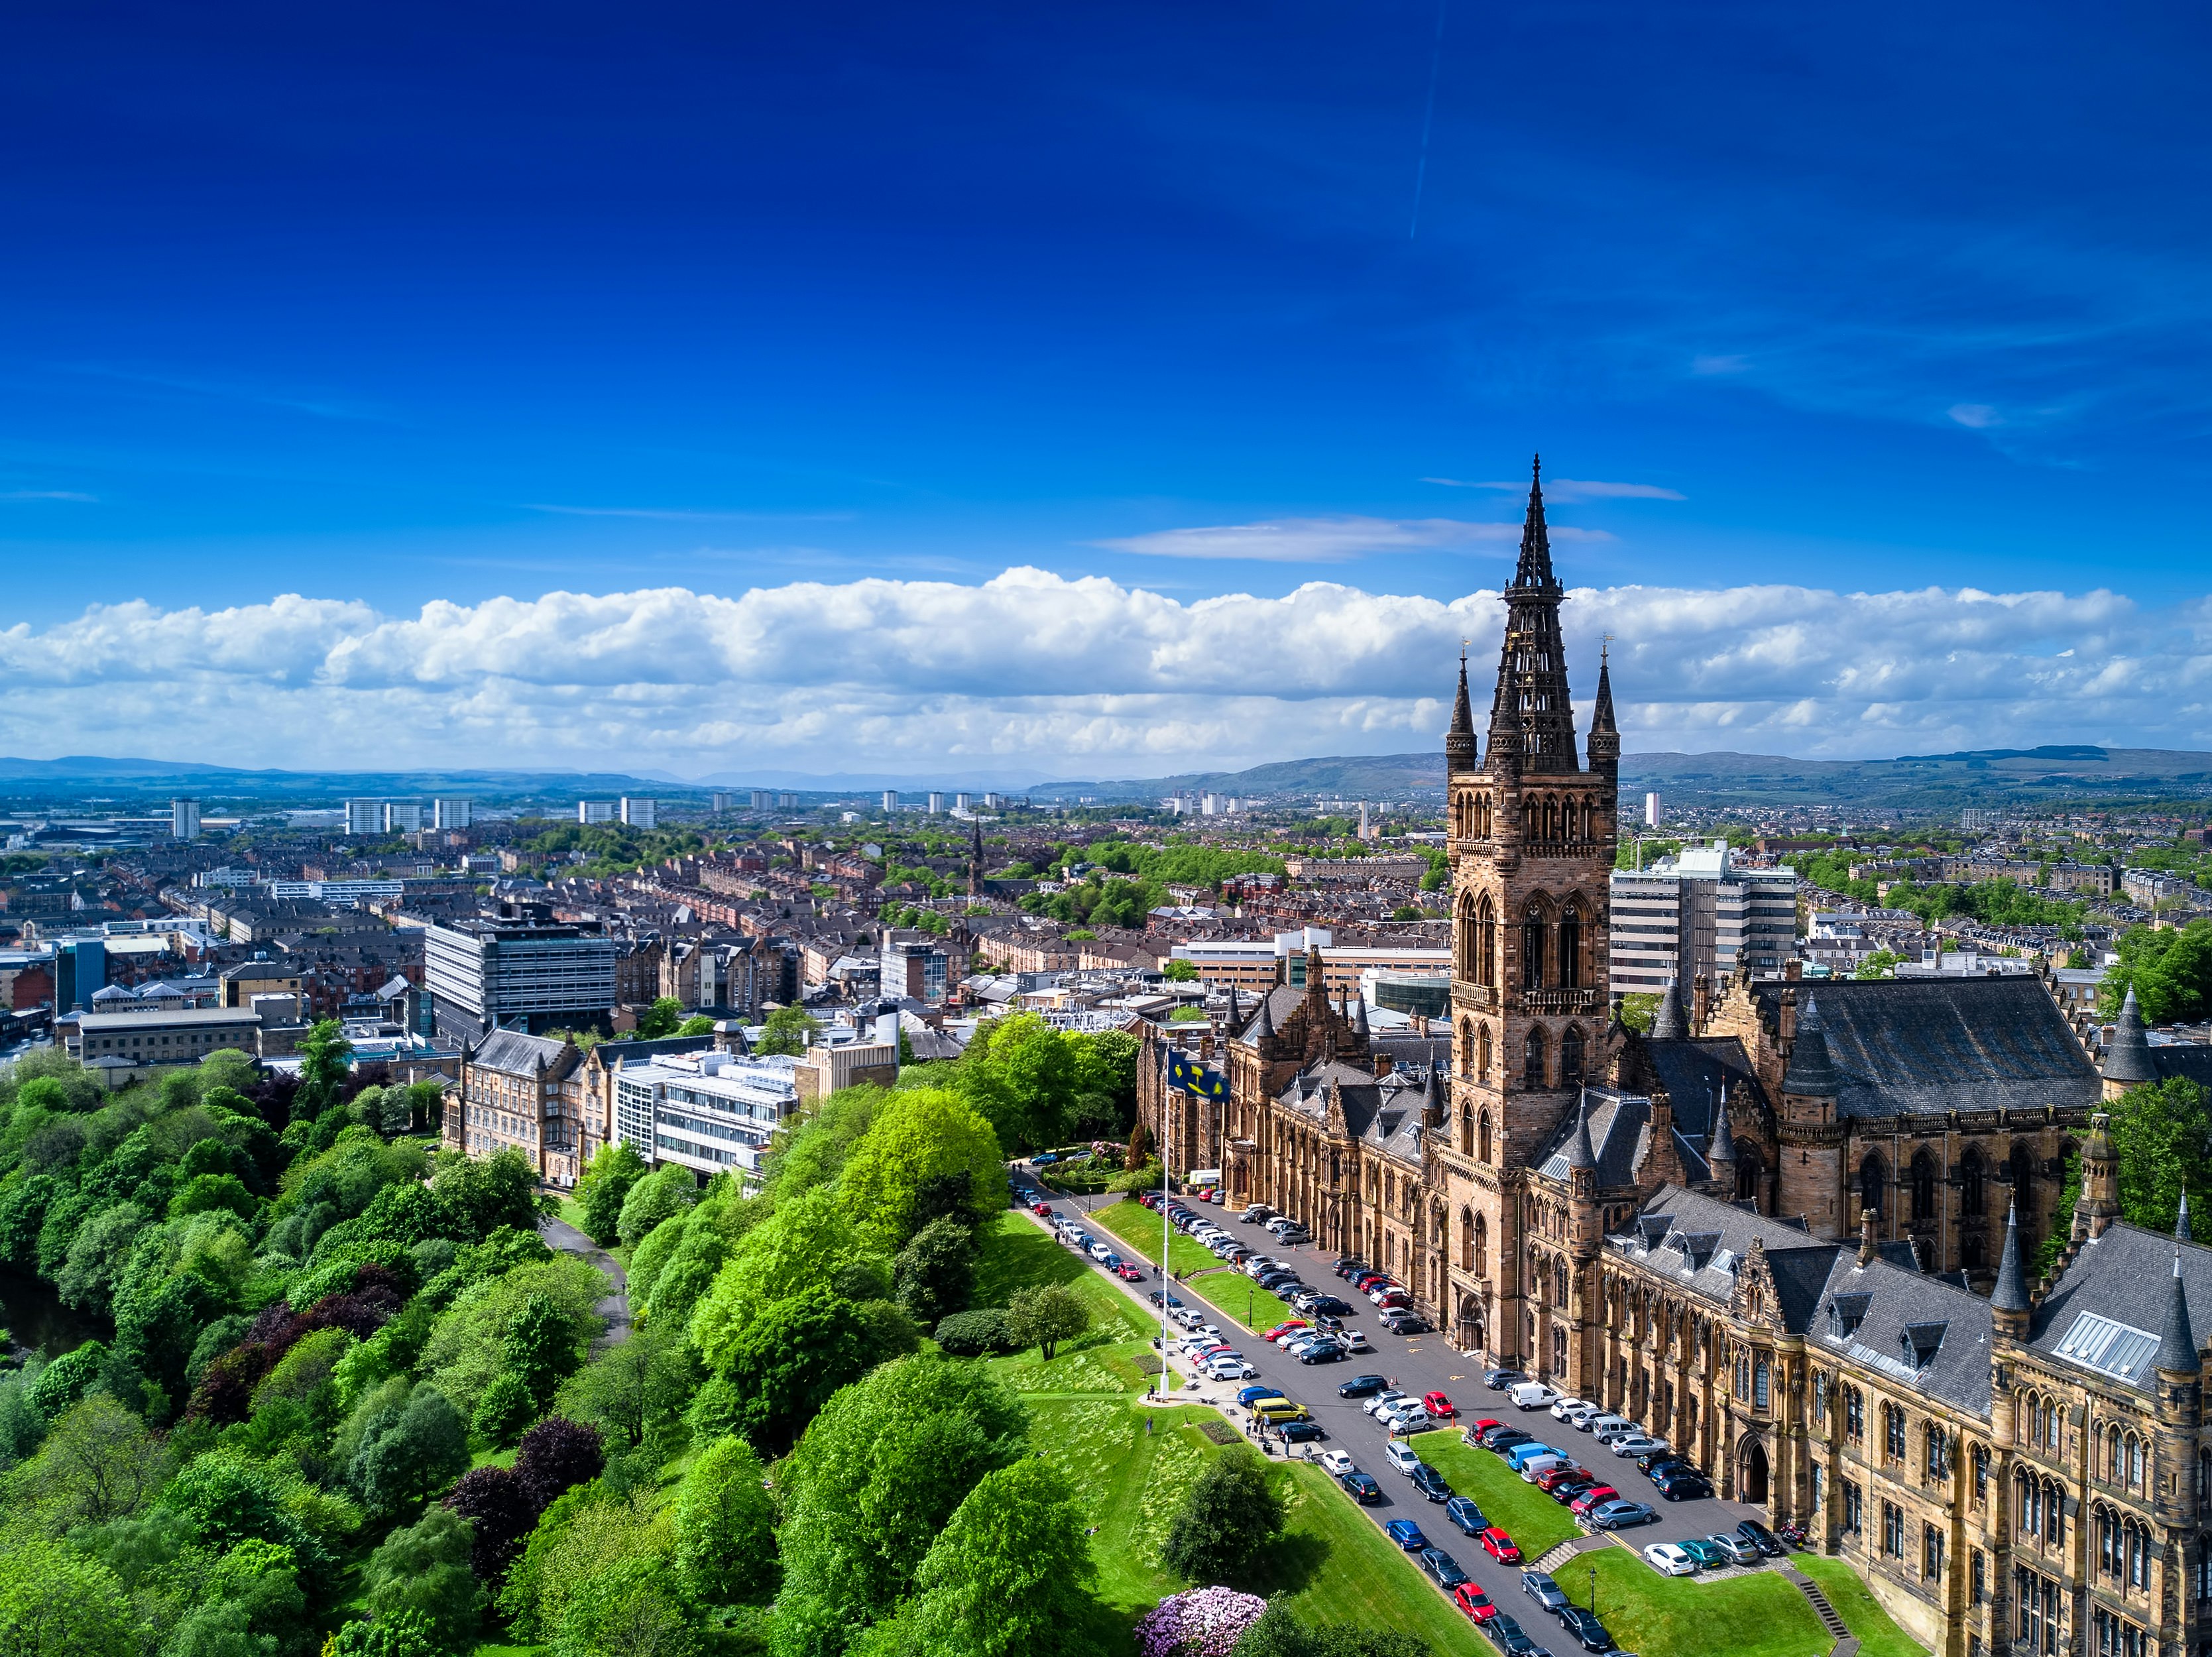 An elevated view of Glasgow; Glasgow University and its green surrounds take up most of the frame, while the industrial city stretches beyond.